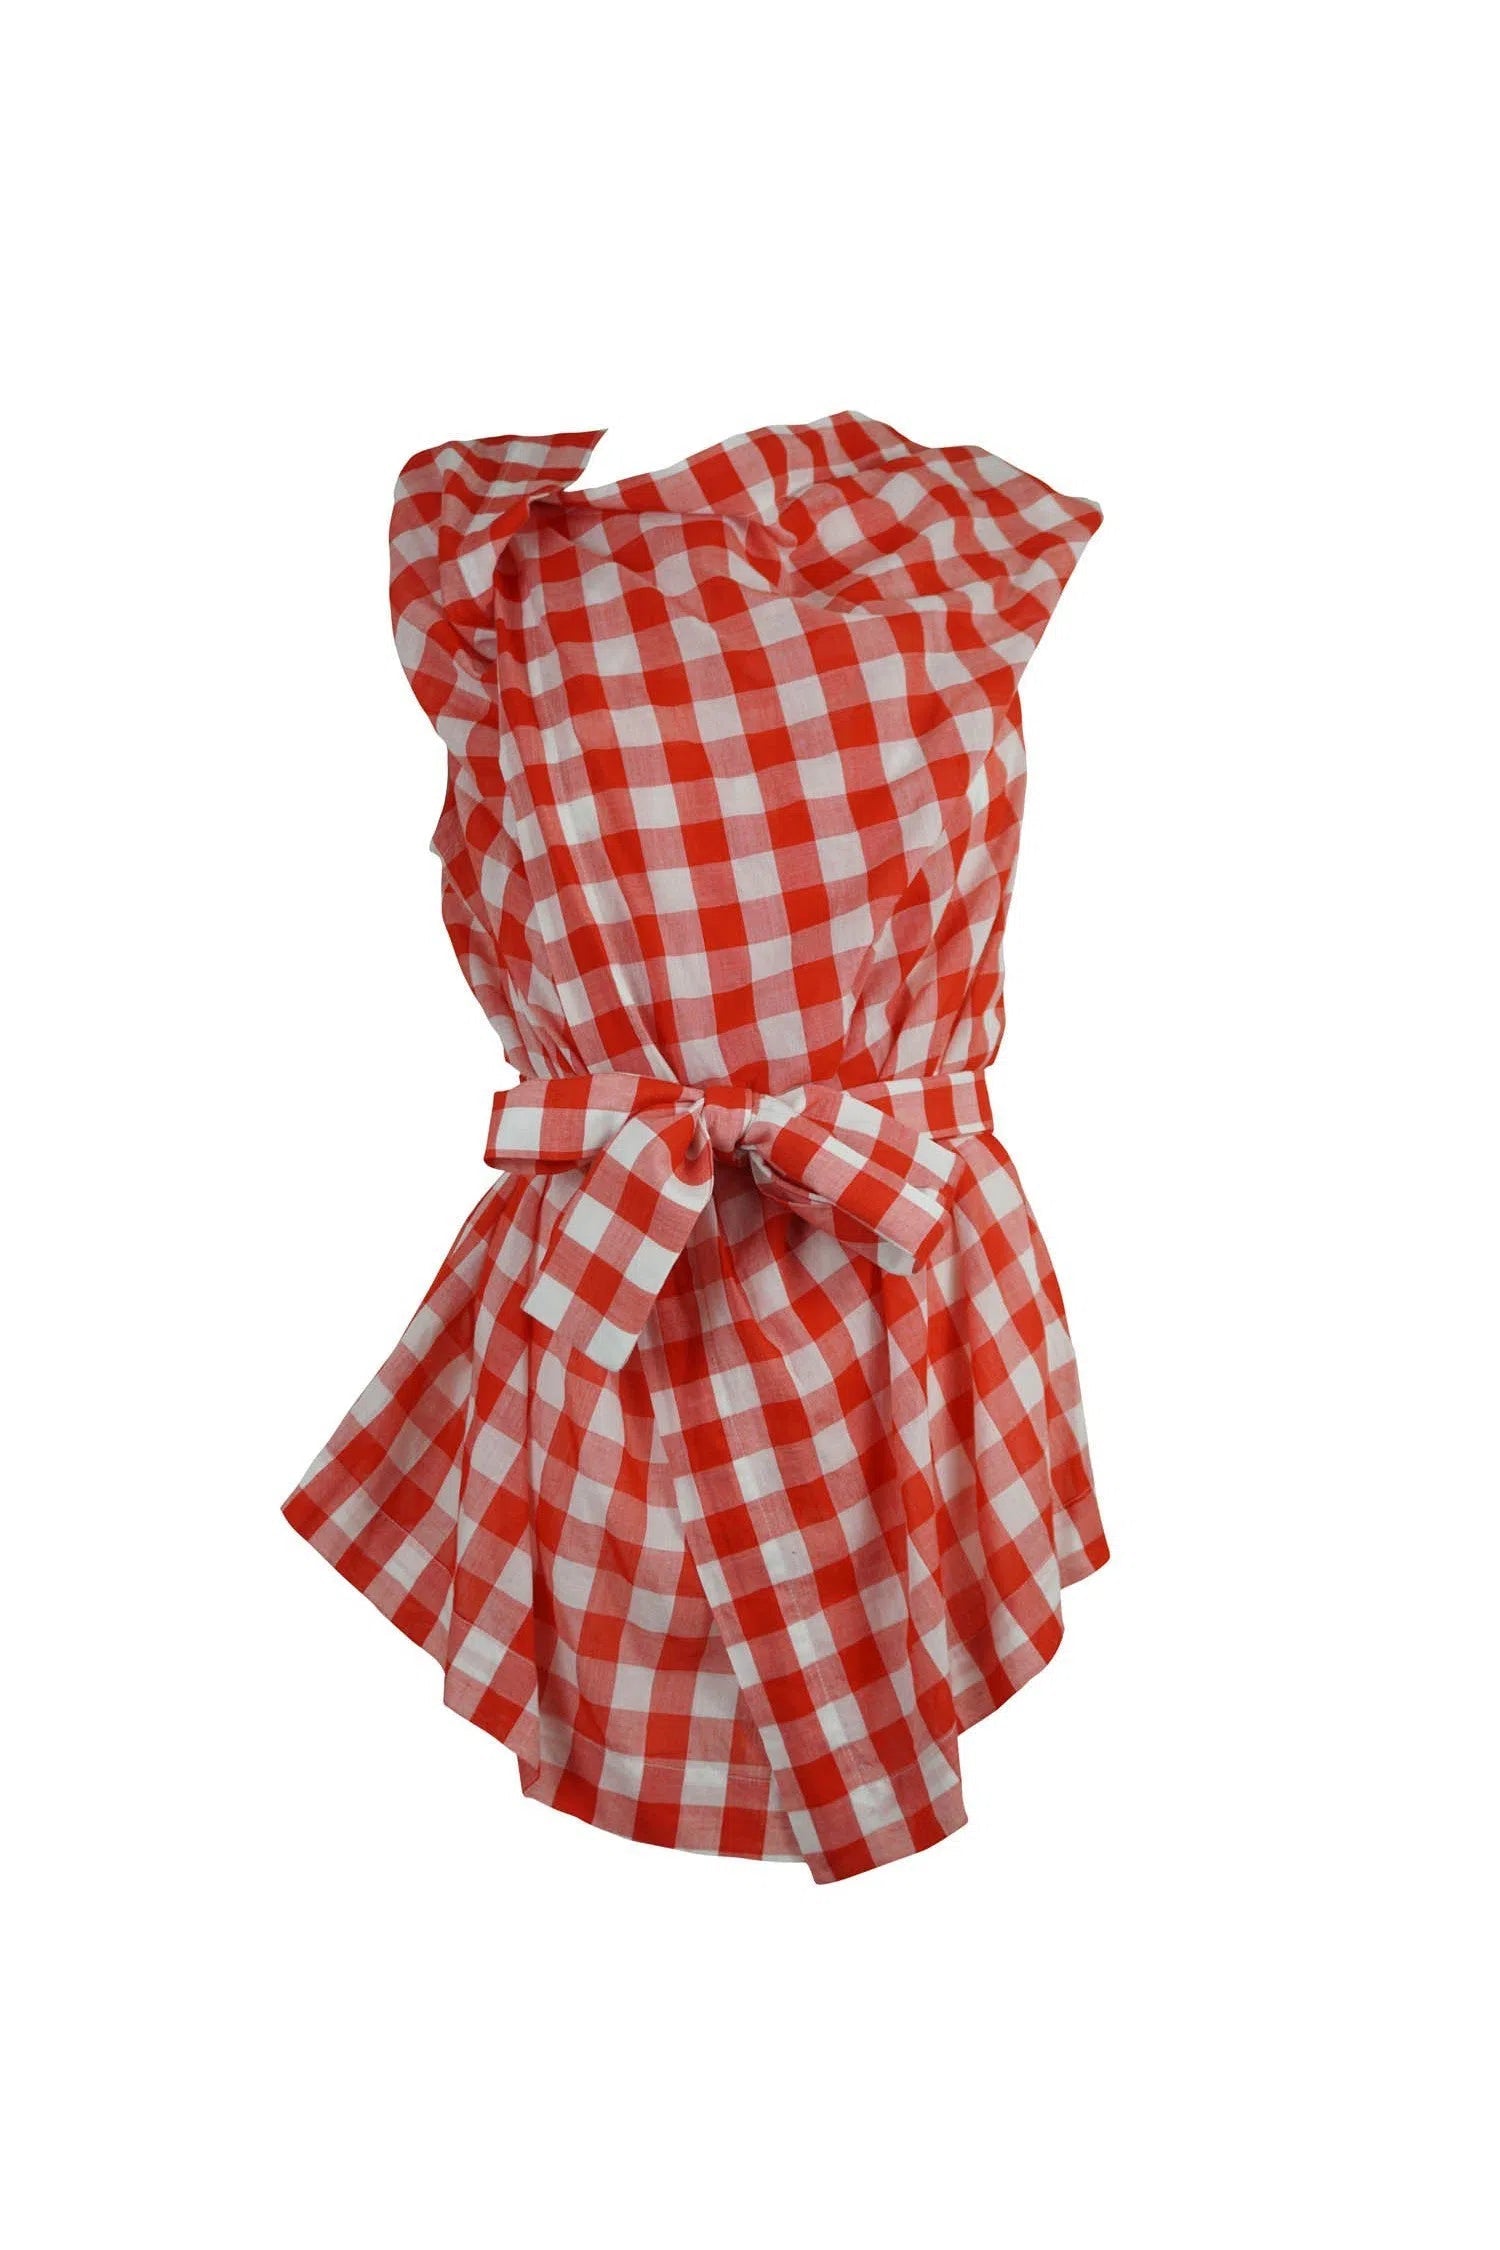 Vivienne Westwood Gingham Draped Blouse - Foxy Couture Carmel